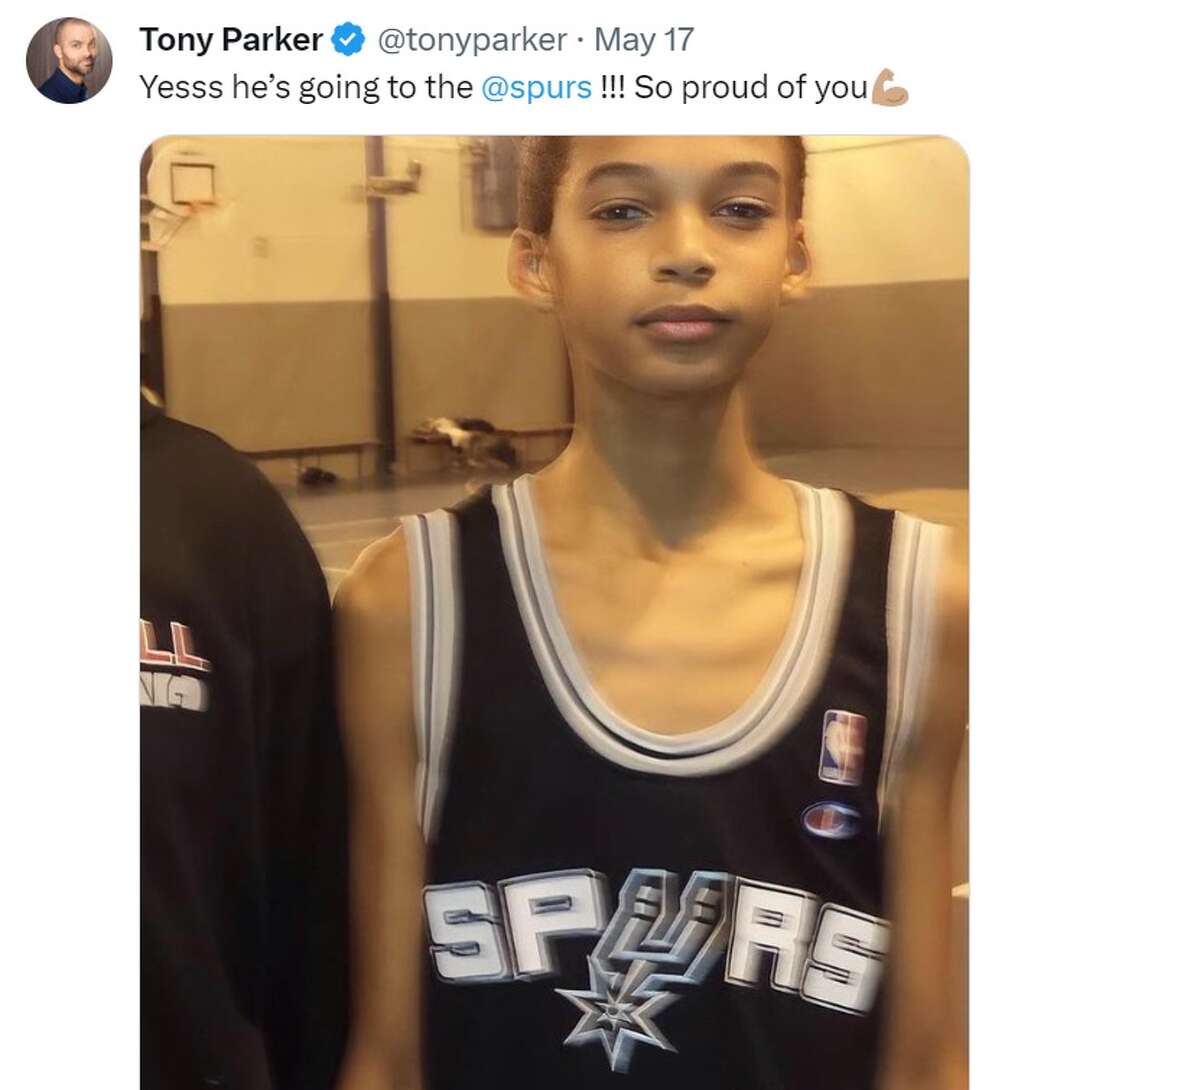 Tony Parker Shared Photo of Young Victor Wembanyama in Spurs